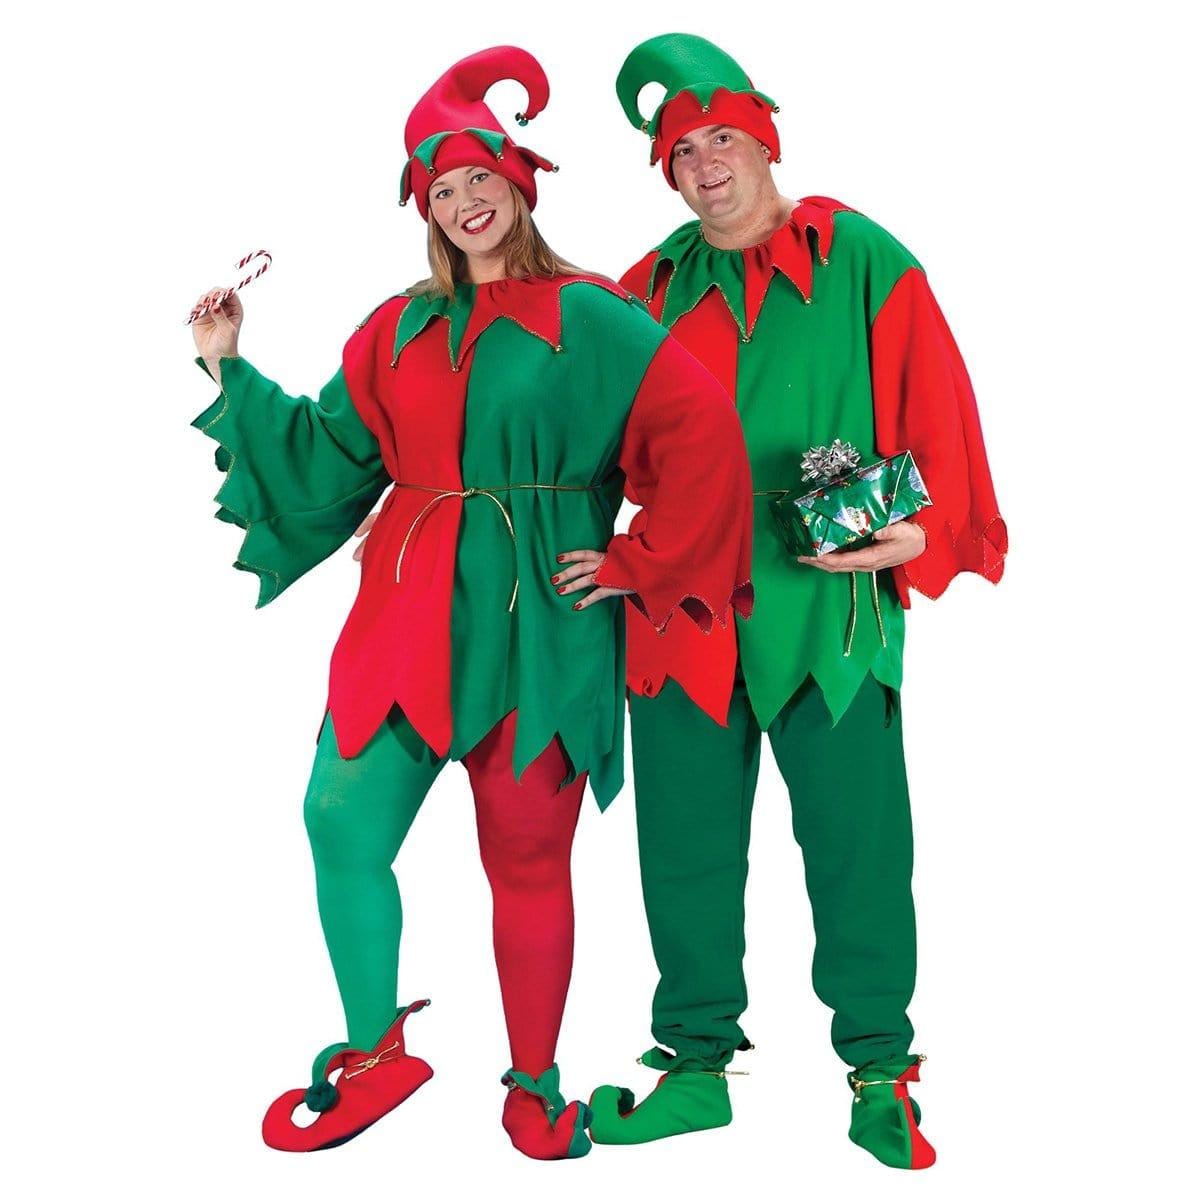 Buy Christmas Elf Costume Set - Plus Size sold at Party Expert